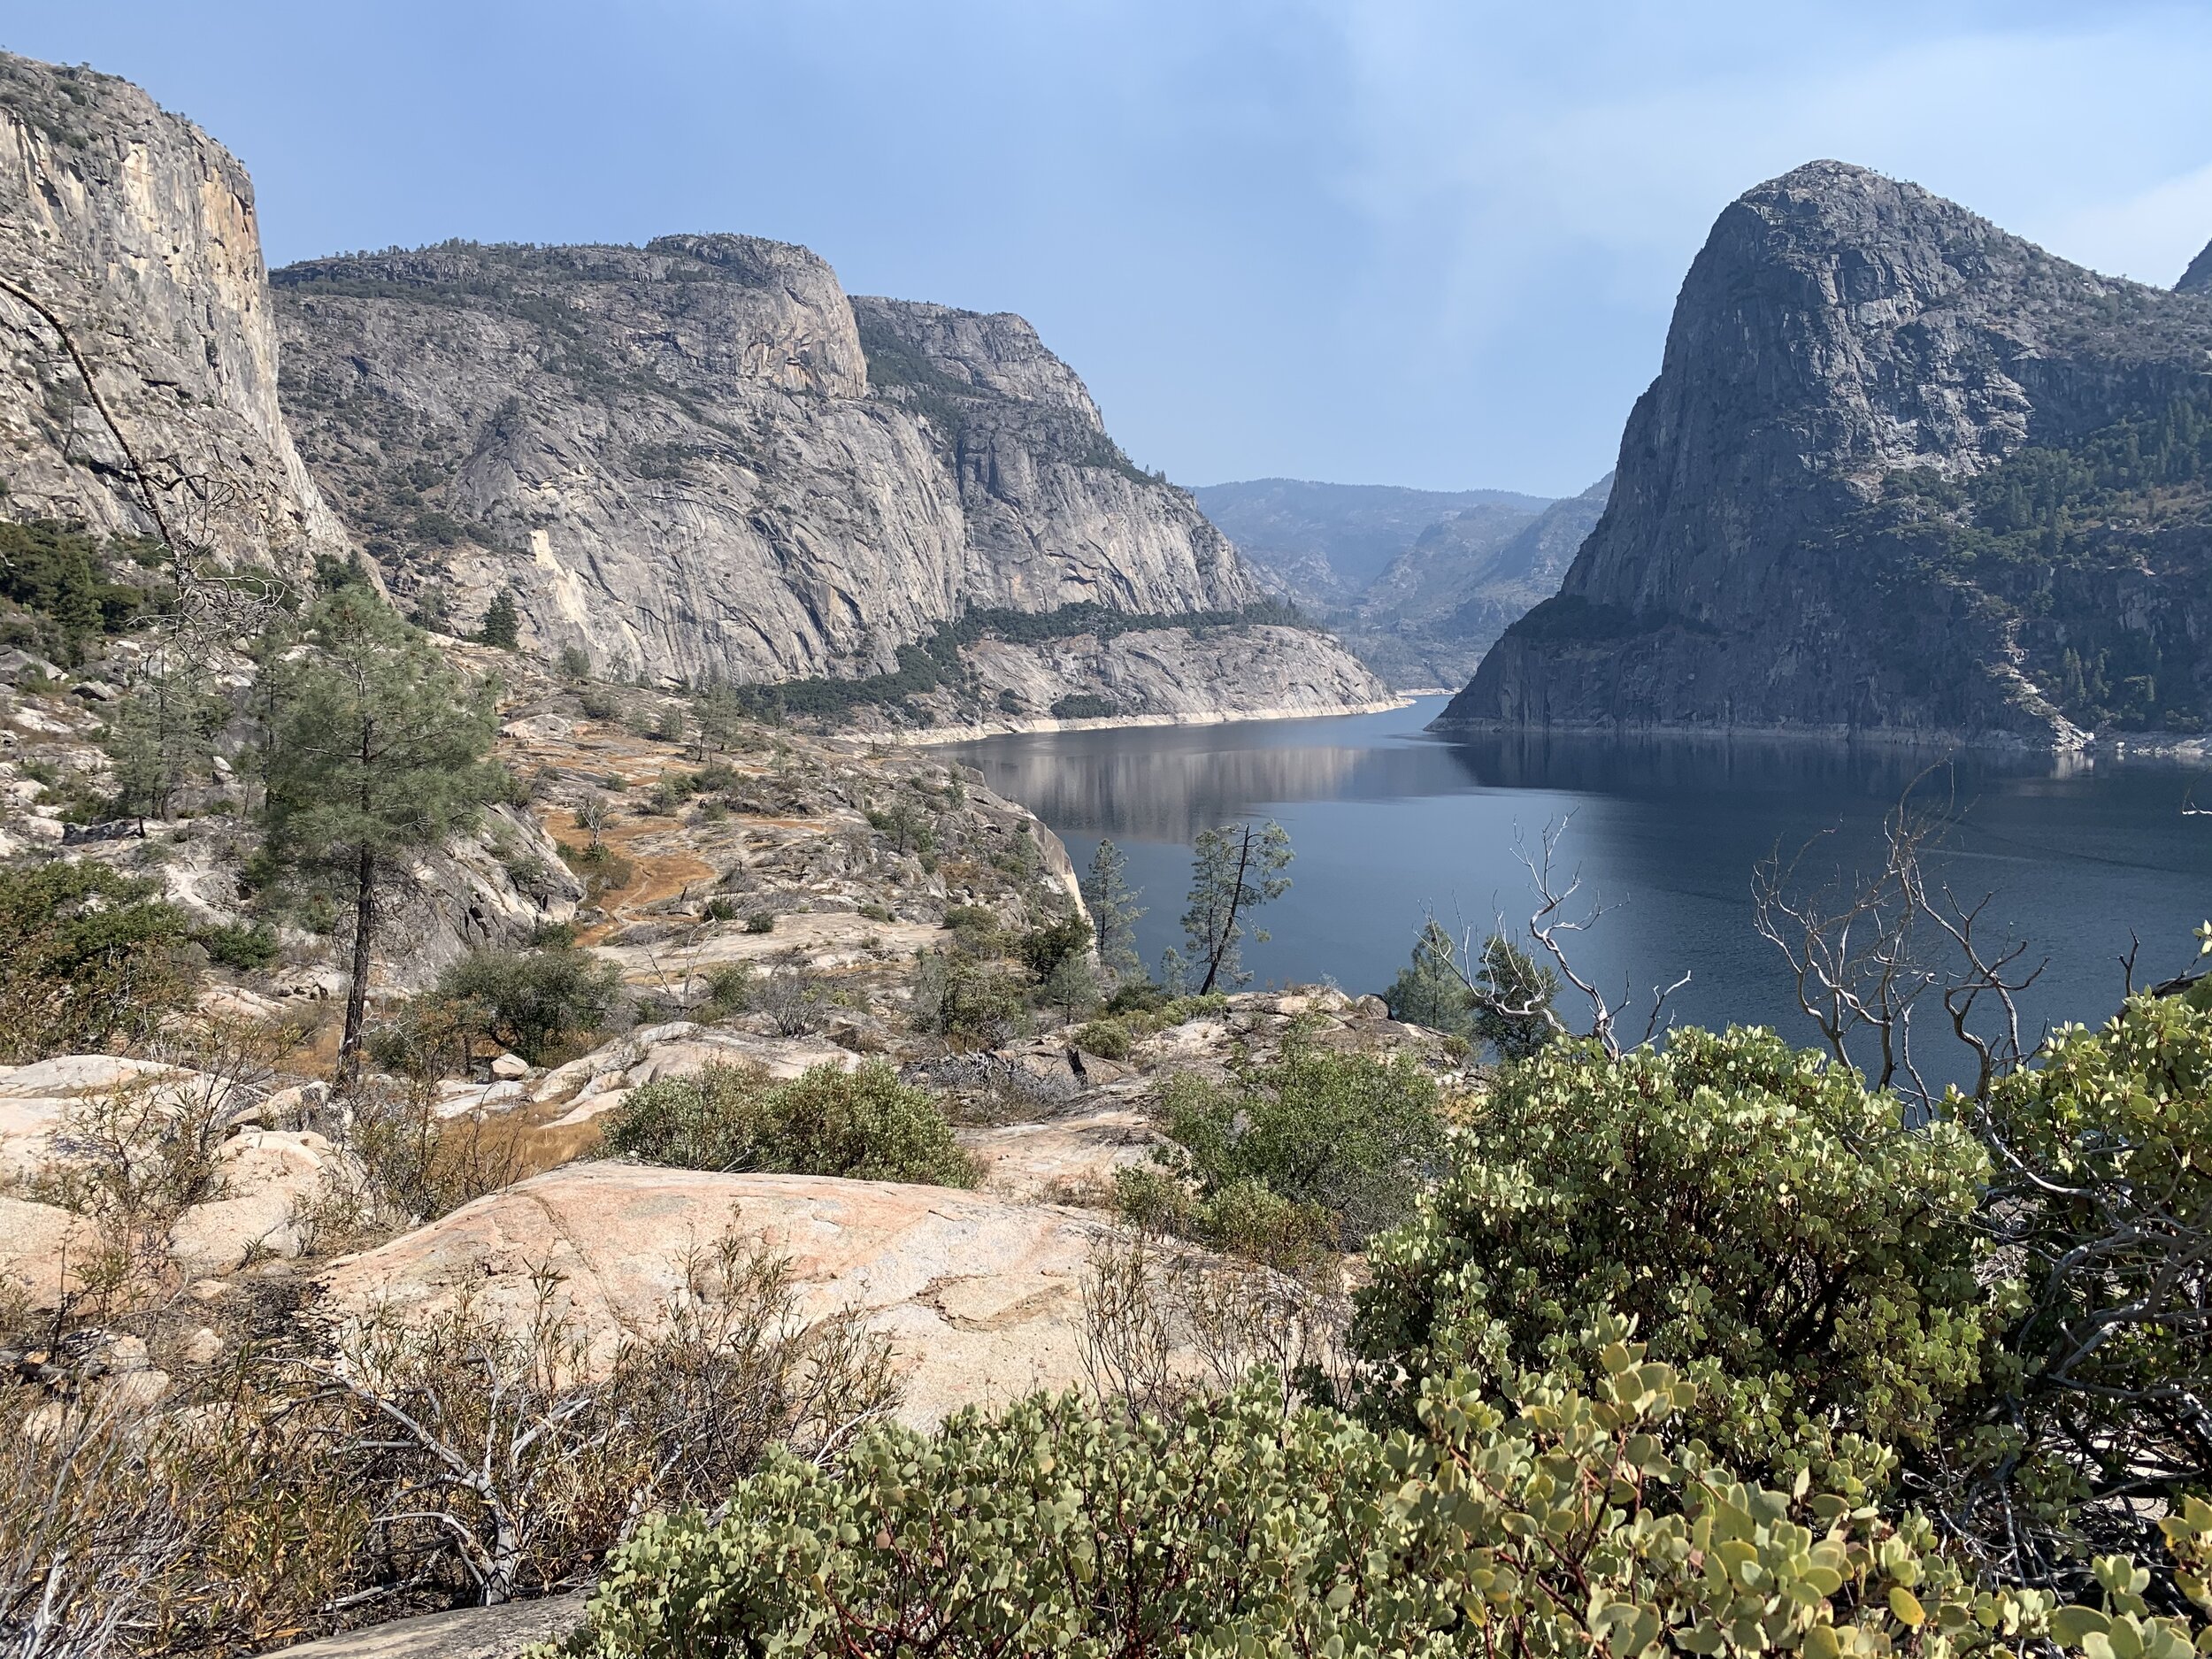  Although equally as beautiful, very few of Yosemite National Park’s visitors take the time or trouble to visit the remote area of the  Hetch Hetchy Reservoir . The entrance to this area is miles out of the way and is therefore known to be a calm and